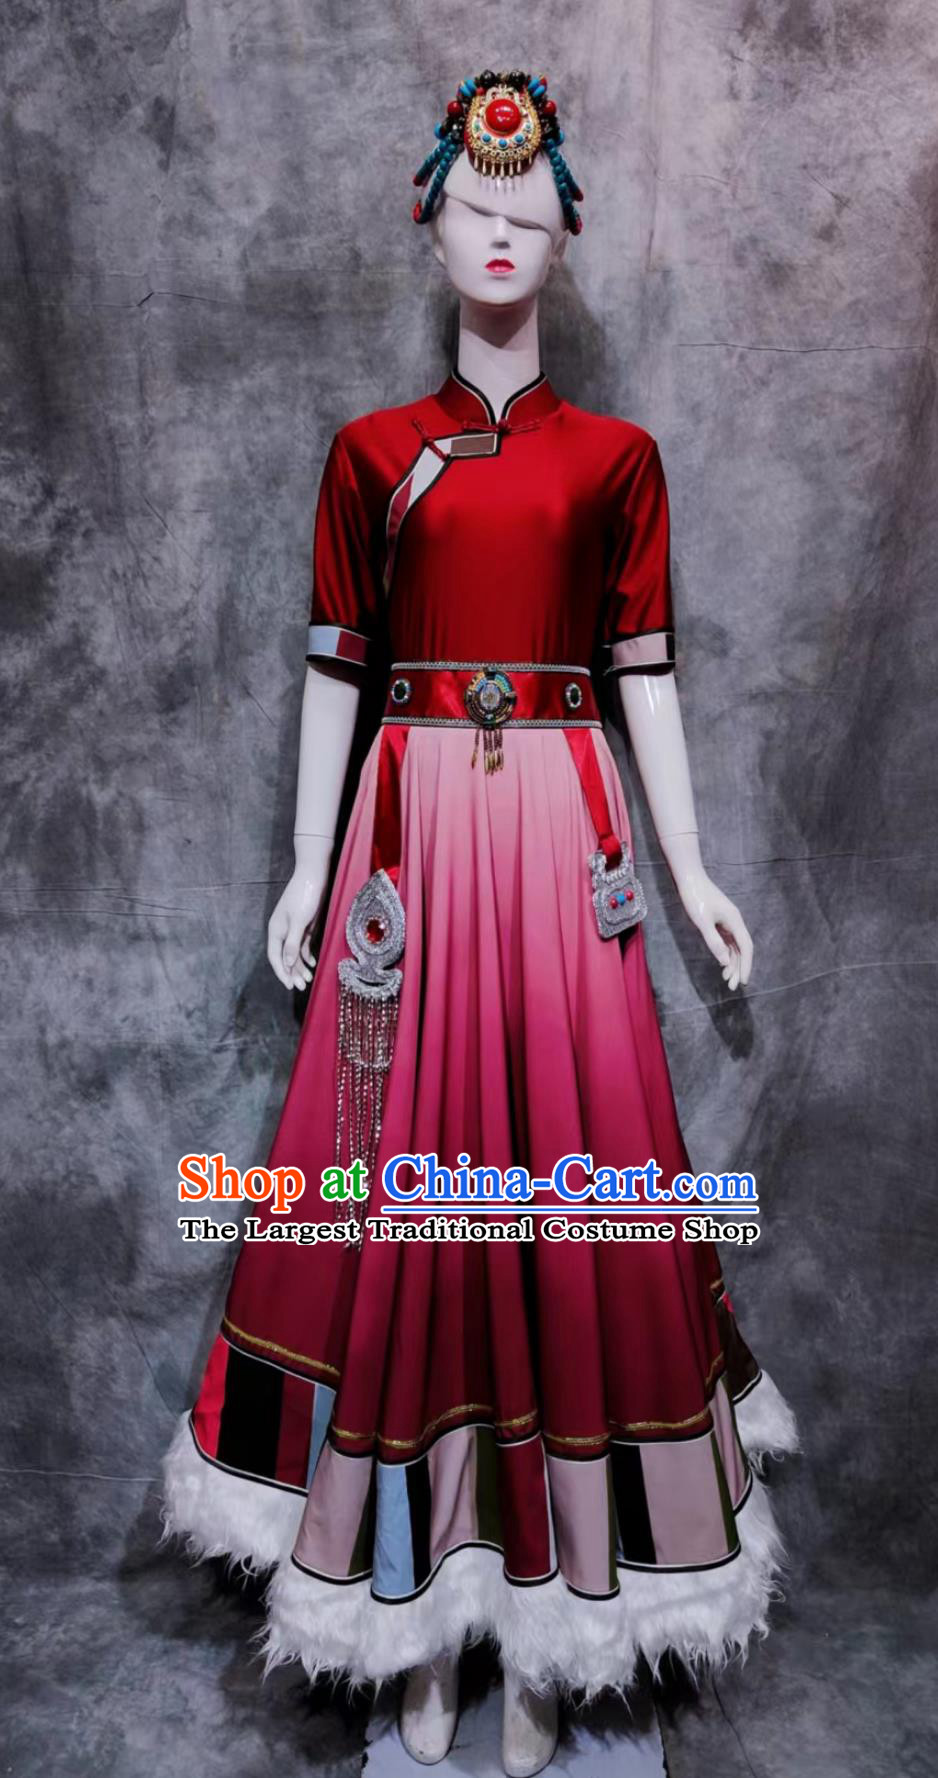 China Zang National Minority Woman Clothing Traditional Stage Show Dress Chinese Tibetan Ethnic Festival Costume